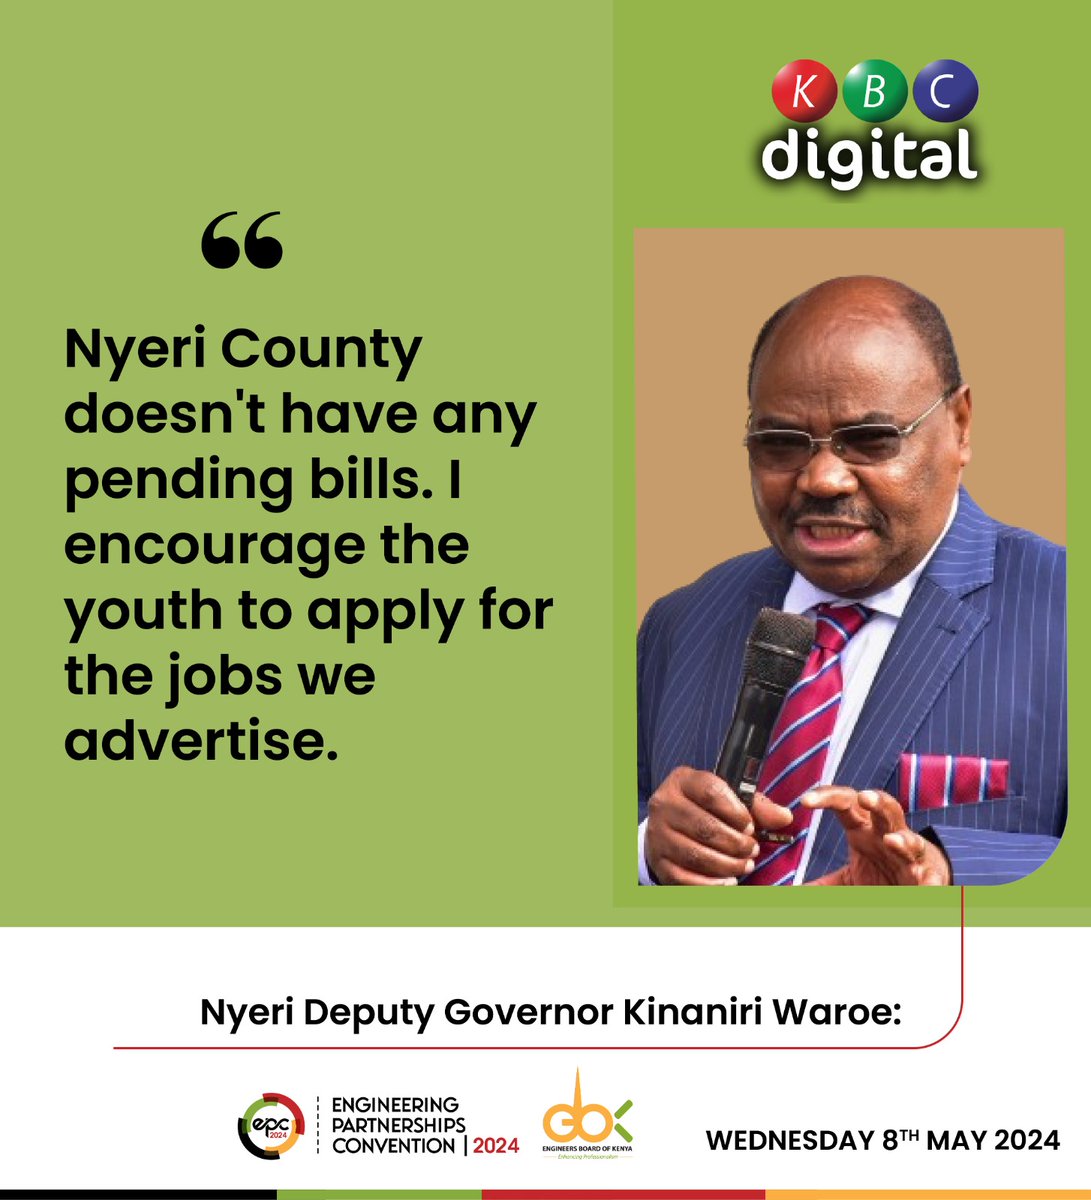 Engineers Partnership Convention Nyeri Deputy Governor Kinaniri Waroe encourages the youth to apply for county jobs. Says they will be paid as there are no pending bills. #KBCniYetu #EPC2024 @EngineersBoard